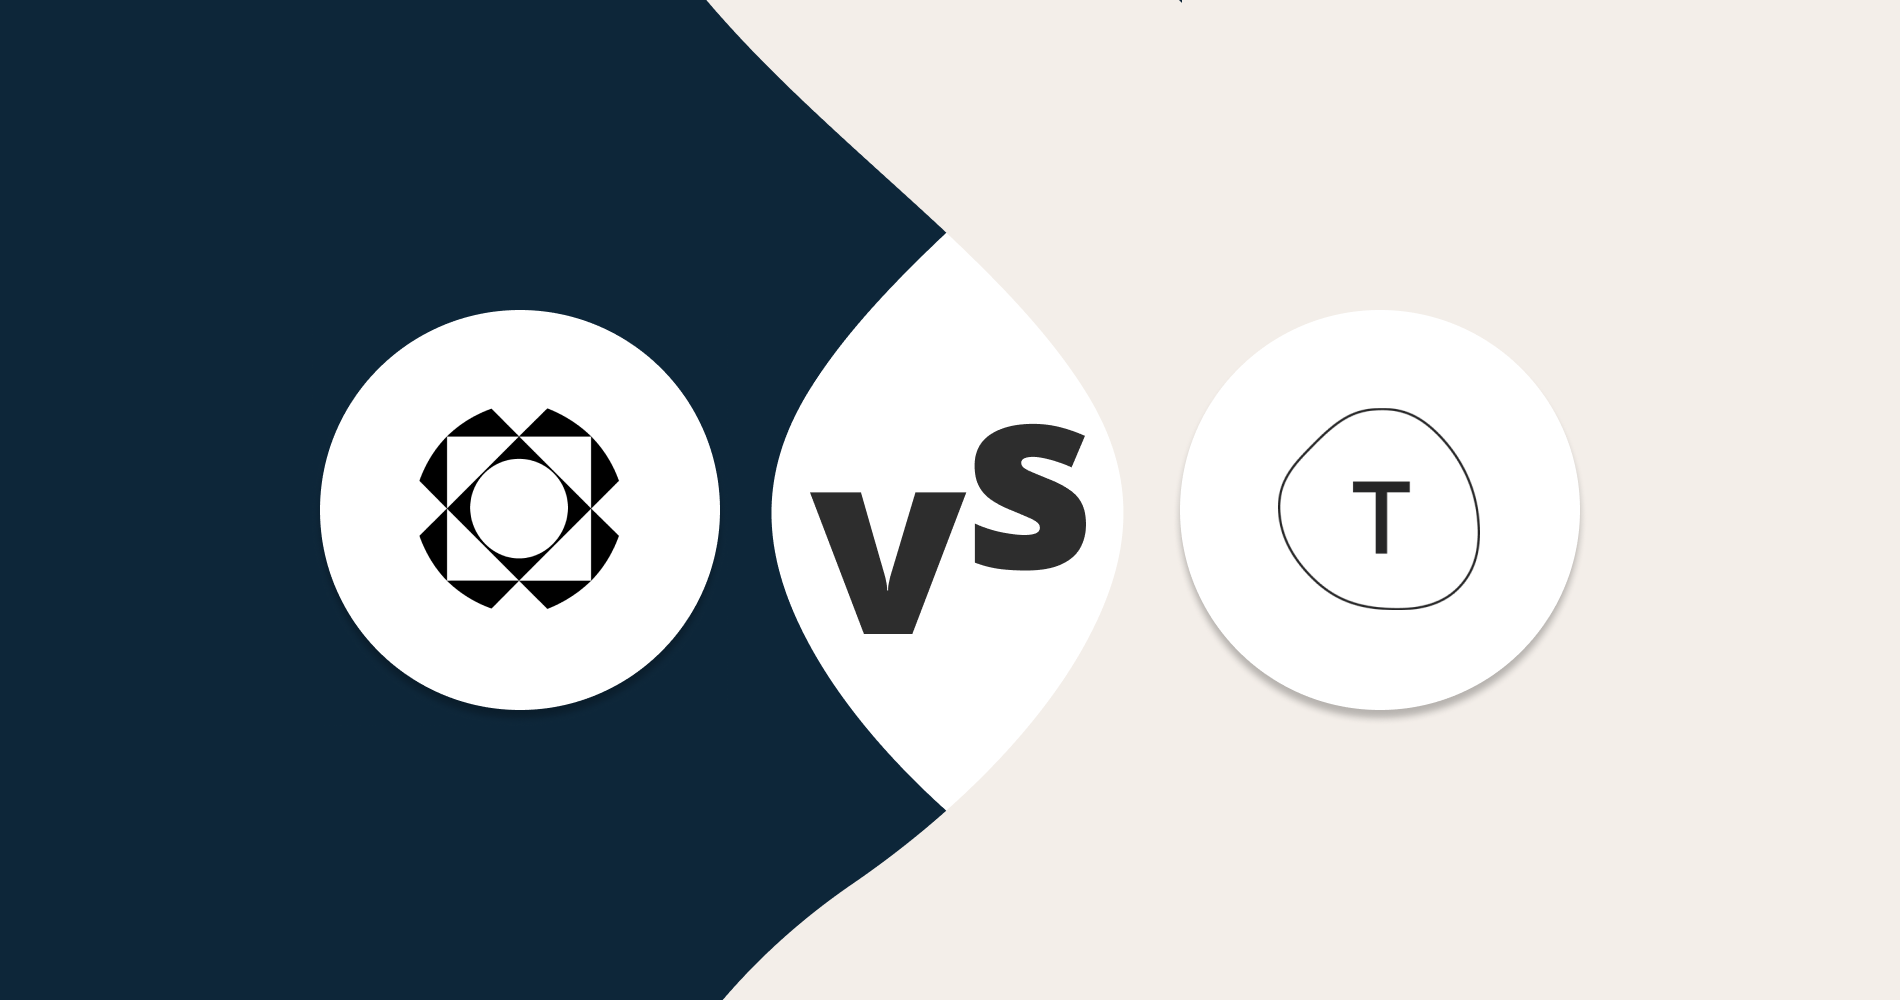 Paperform vs. Typeform: Which one is better?